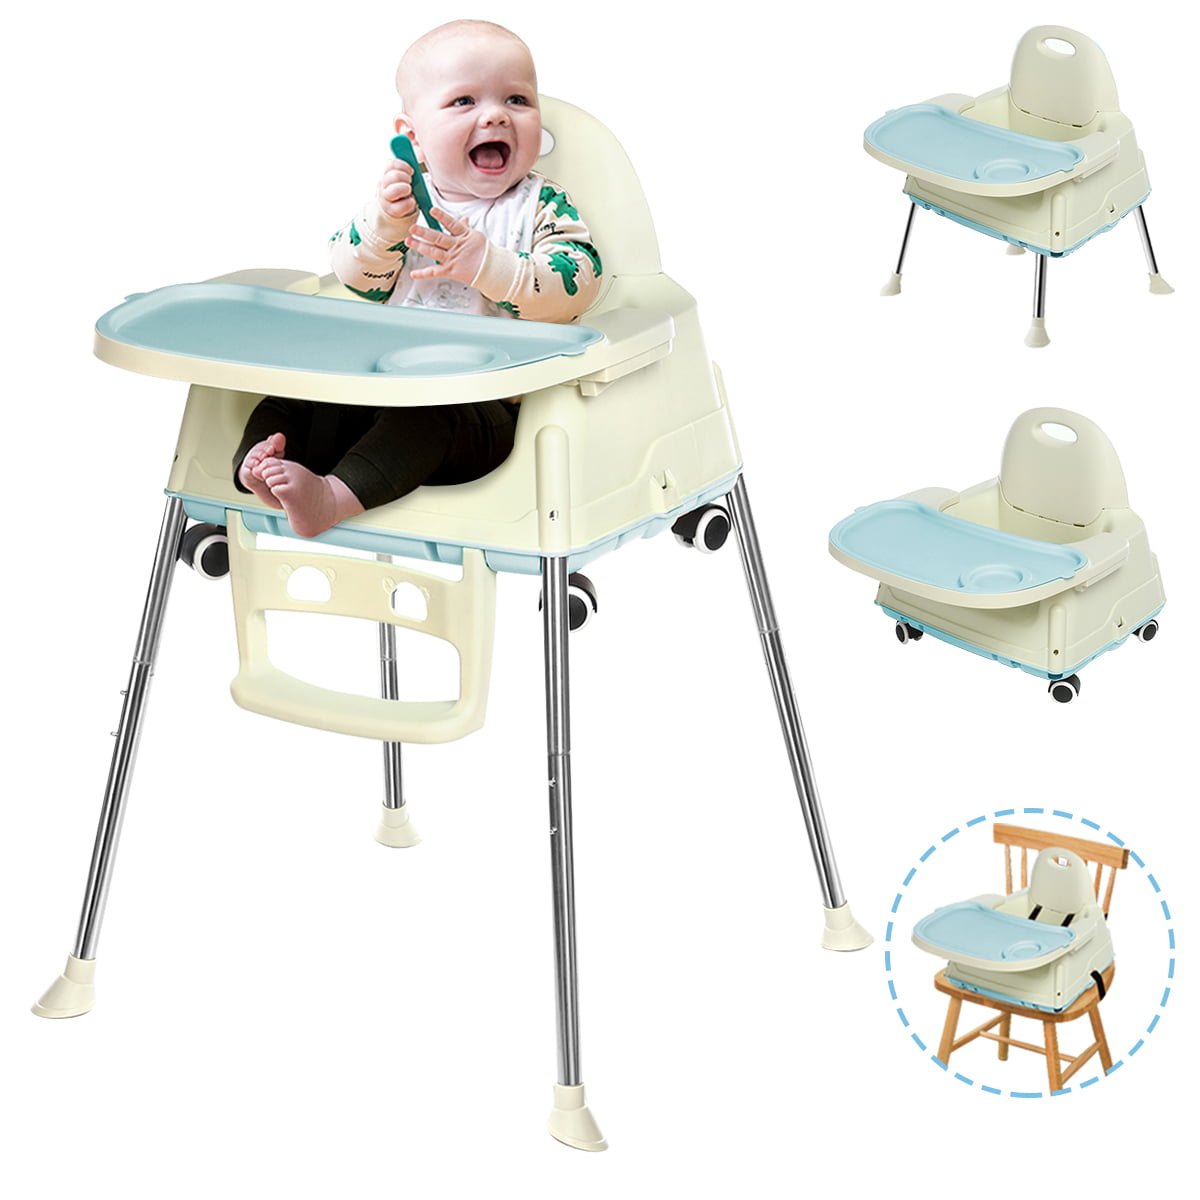 Foldable Baby Safety Soft Waterproof Dinner Chair Infant Seat Feeding Highchair 